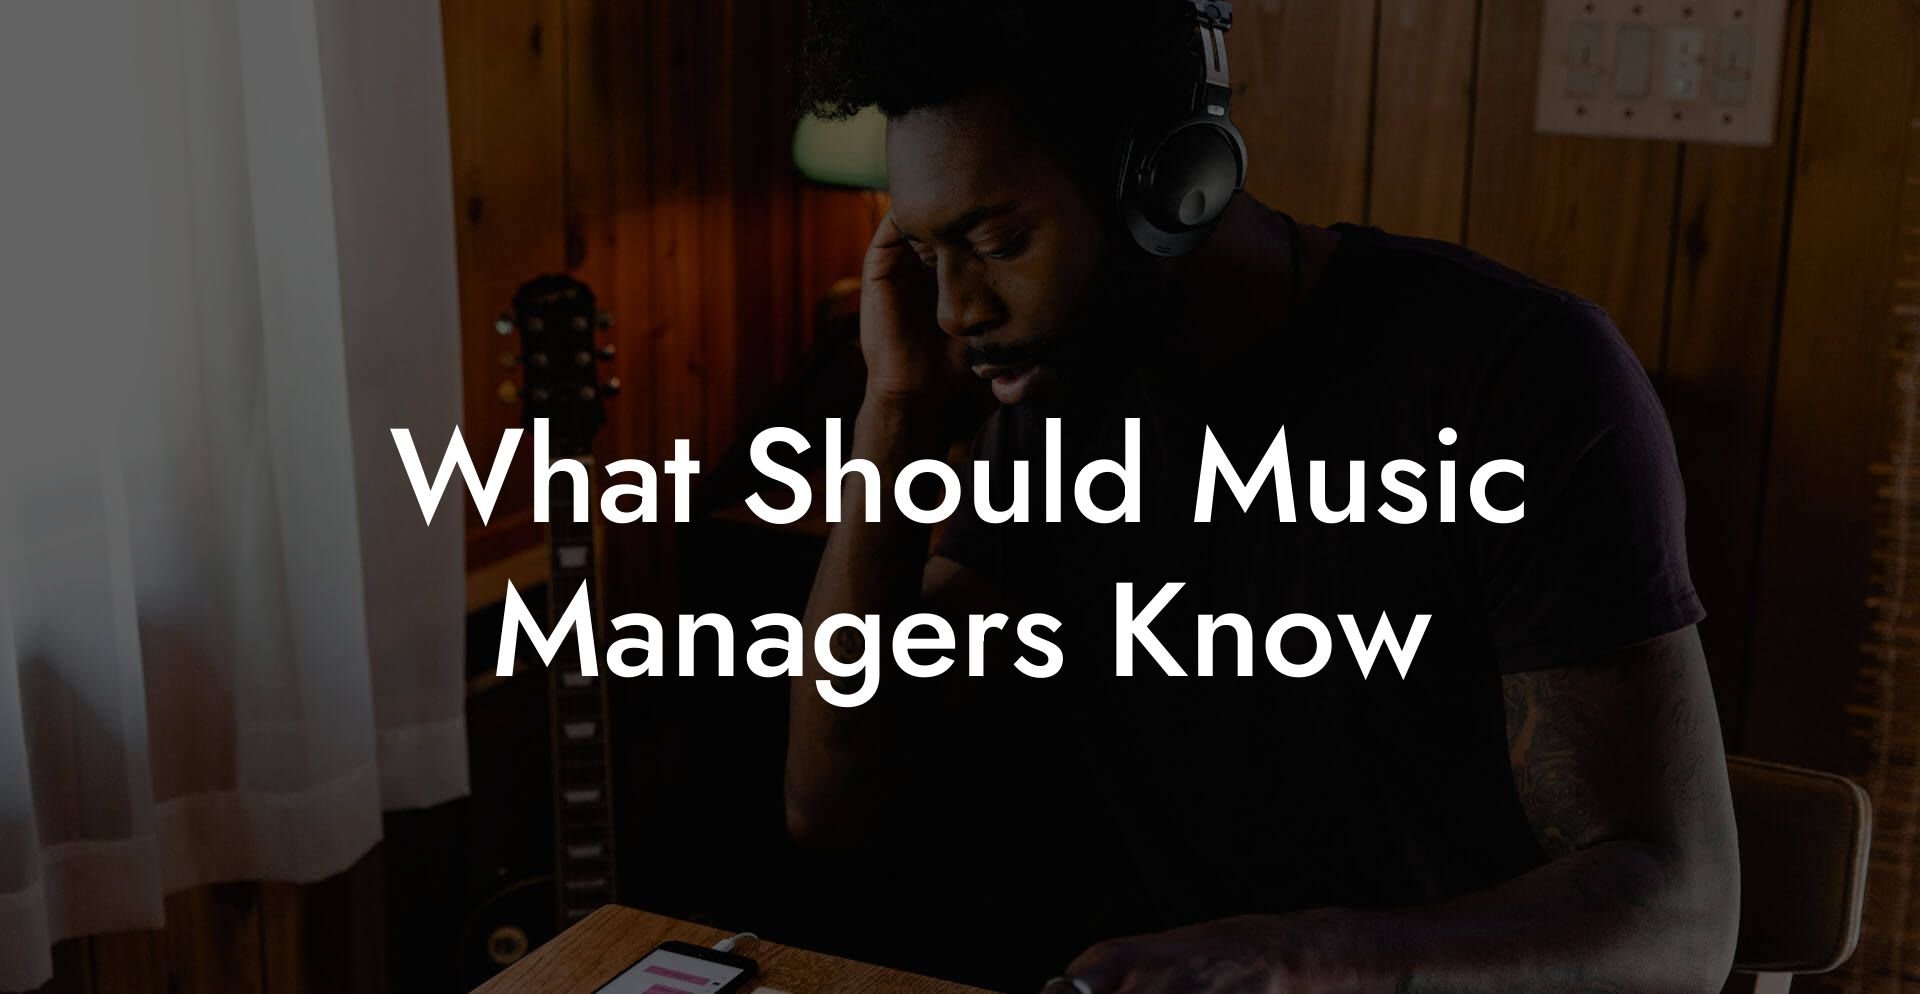 What Should Music Managers Know